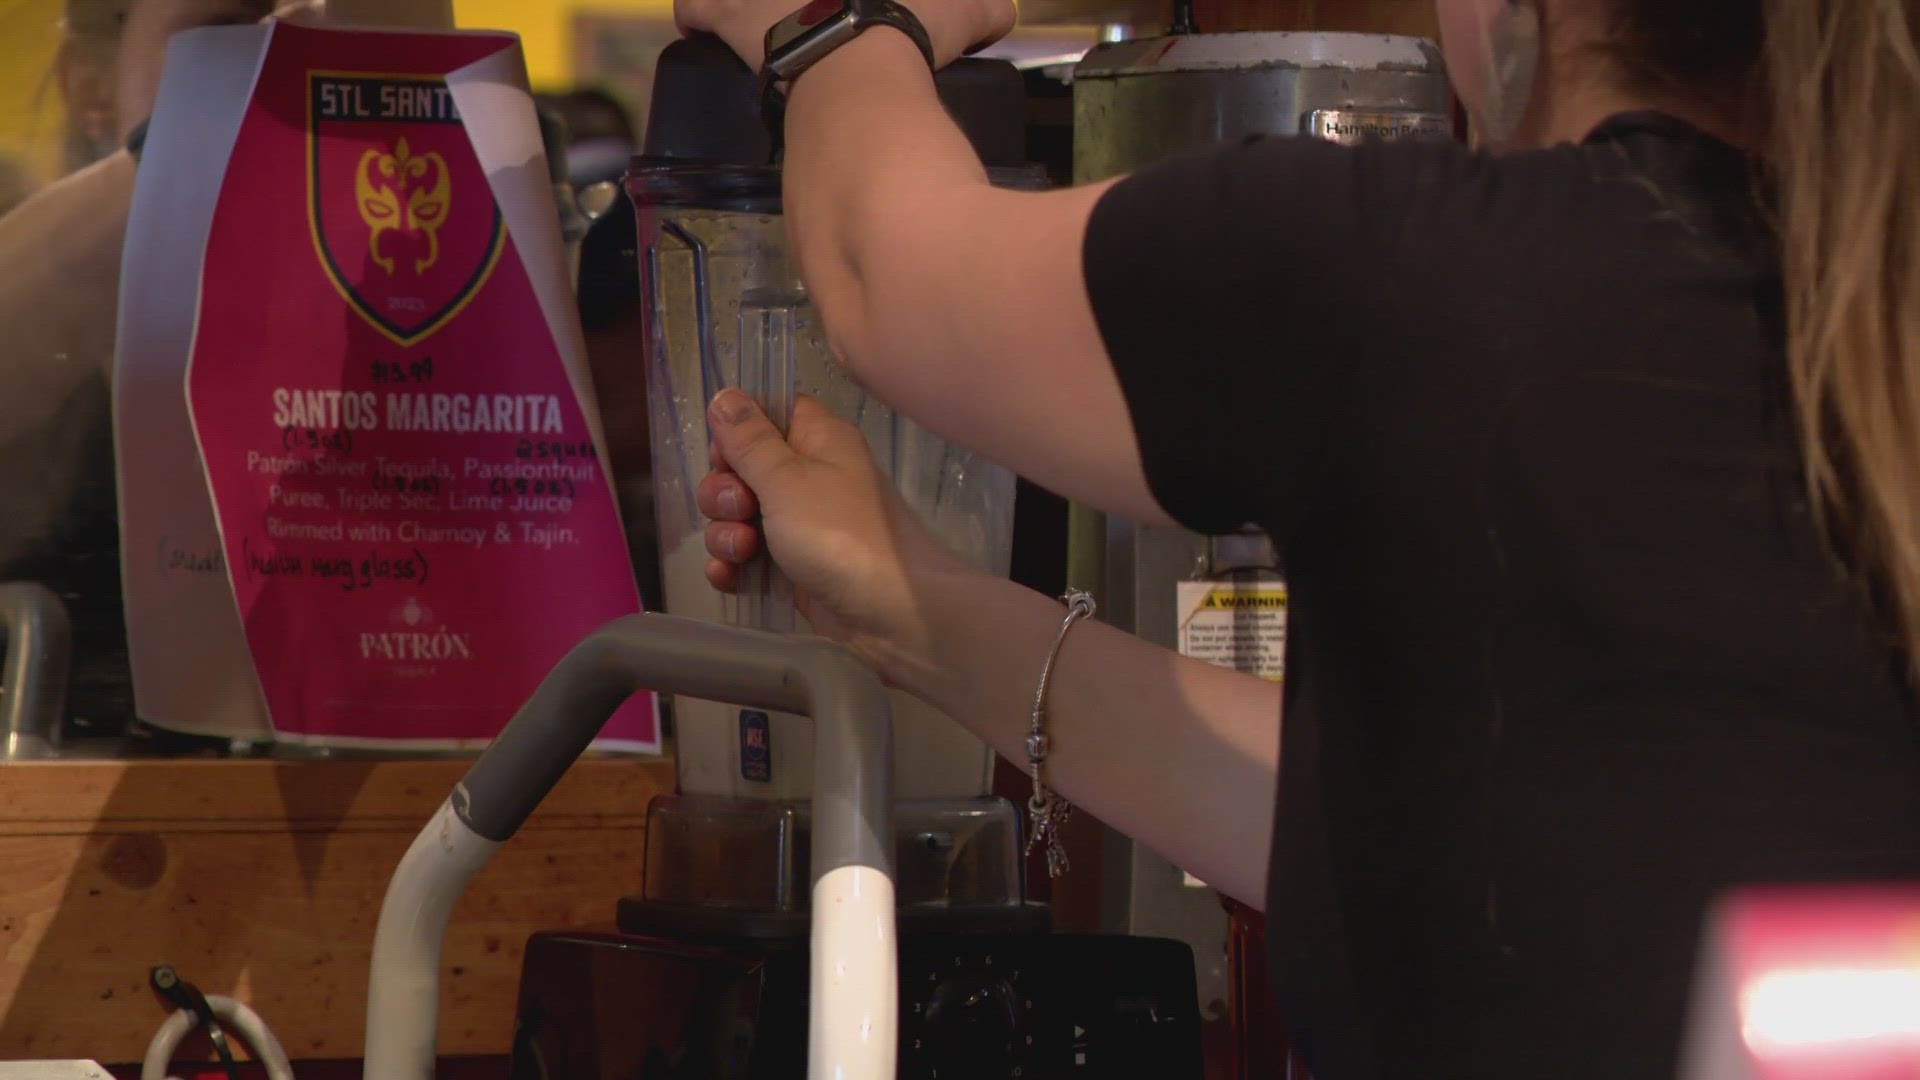 A recently passed bill would let restaurants and bars apply for a 90-day temporary liquor license rather than go through the process of gathering signatures.